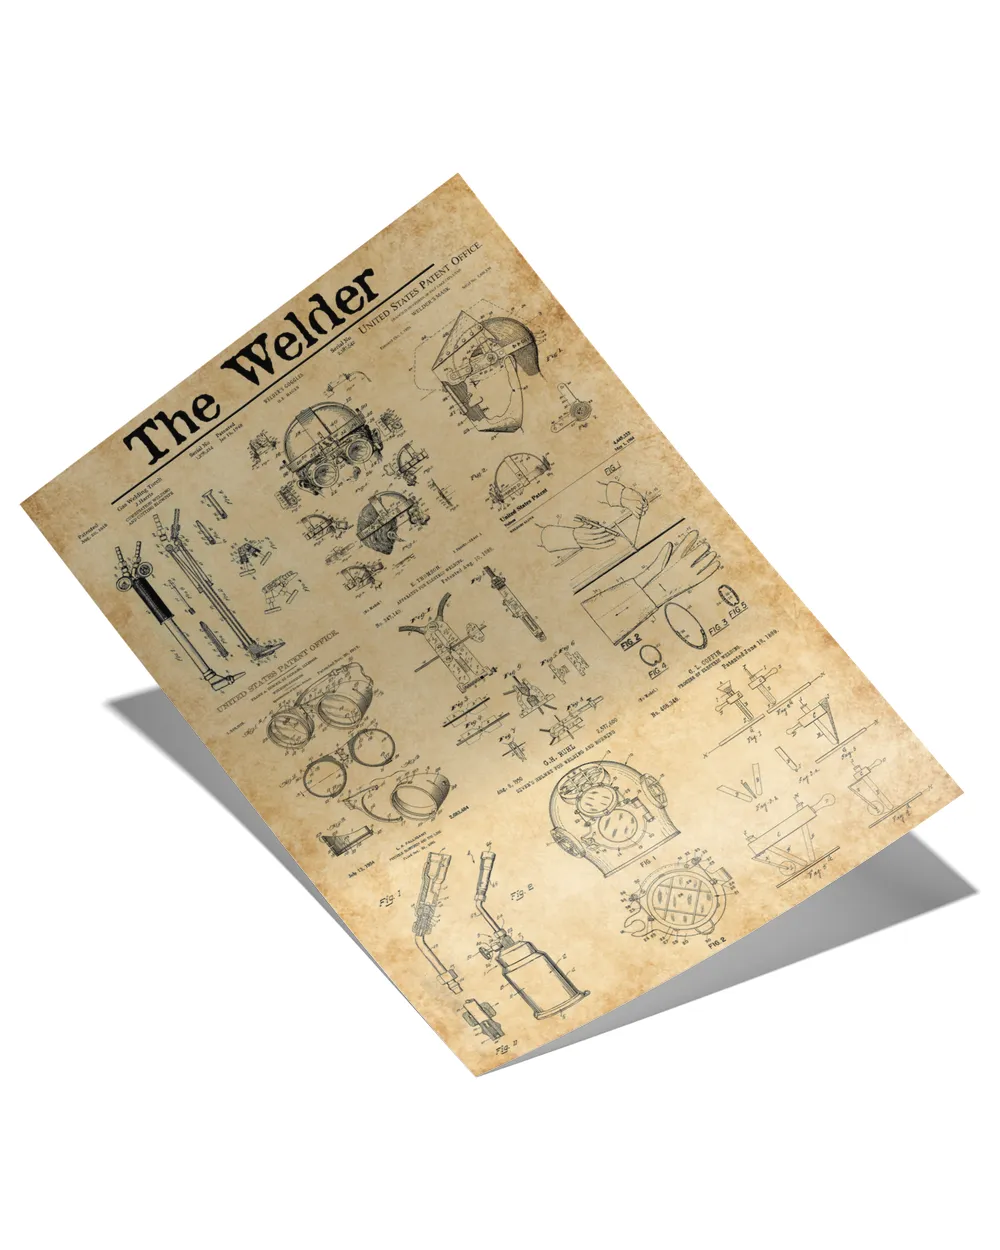 The Welder Patent Poster